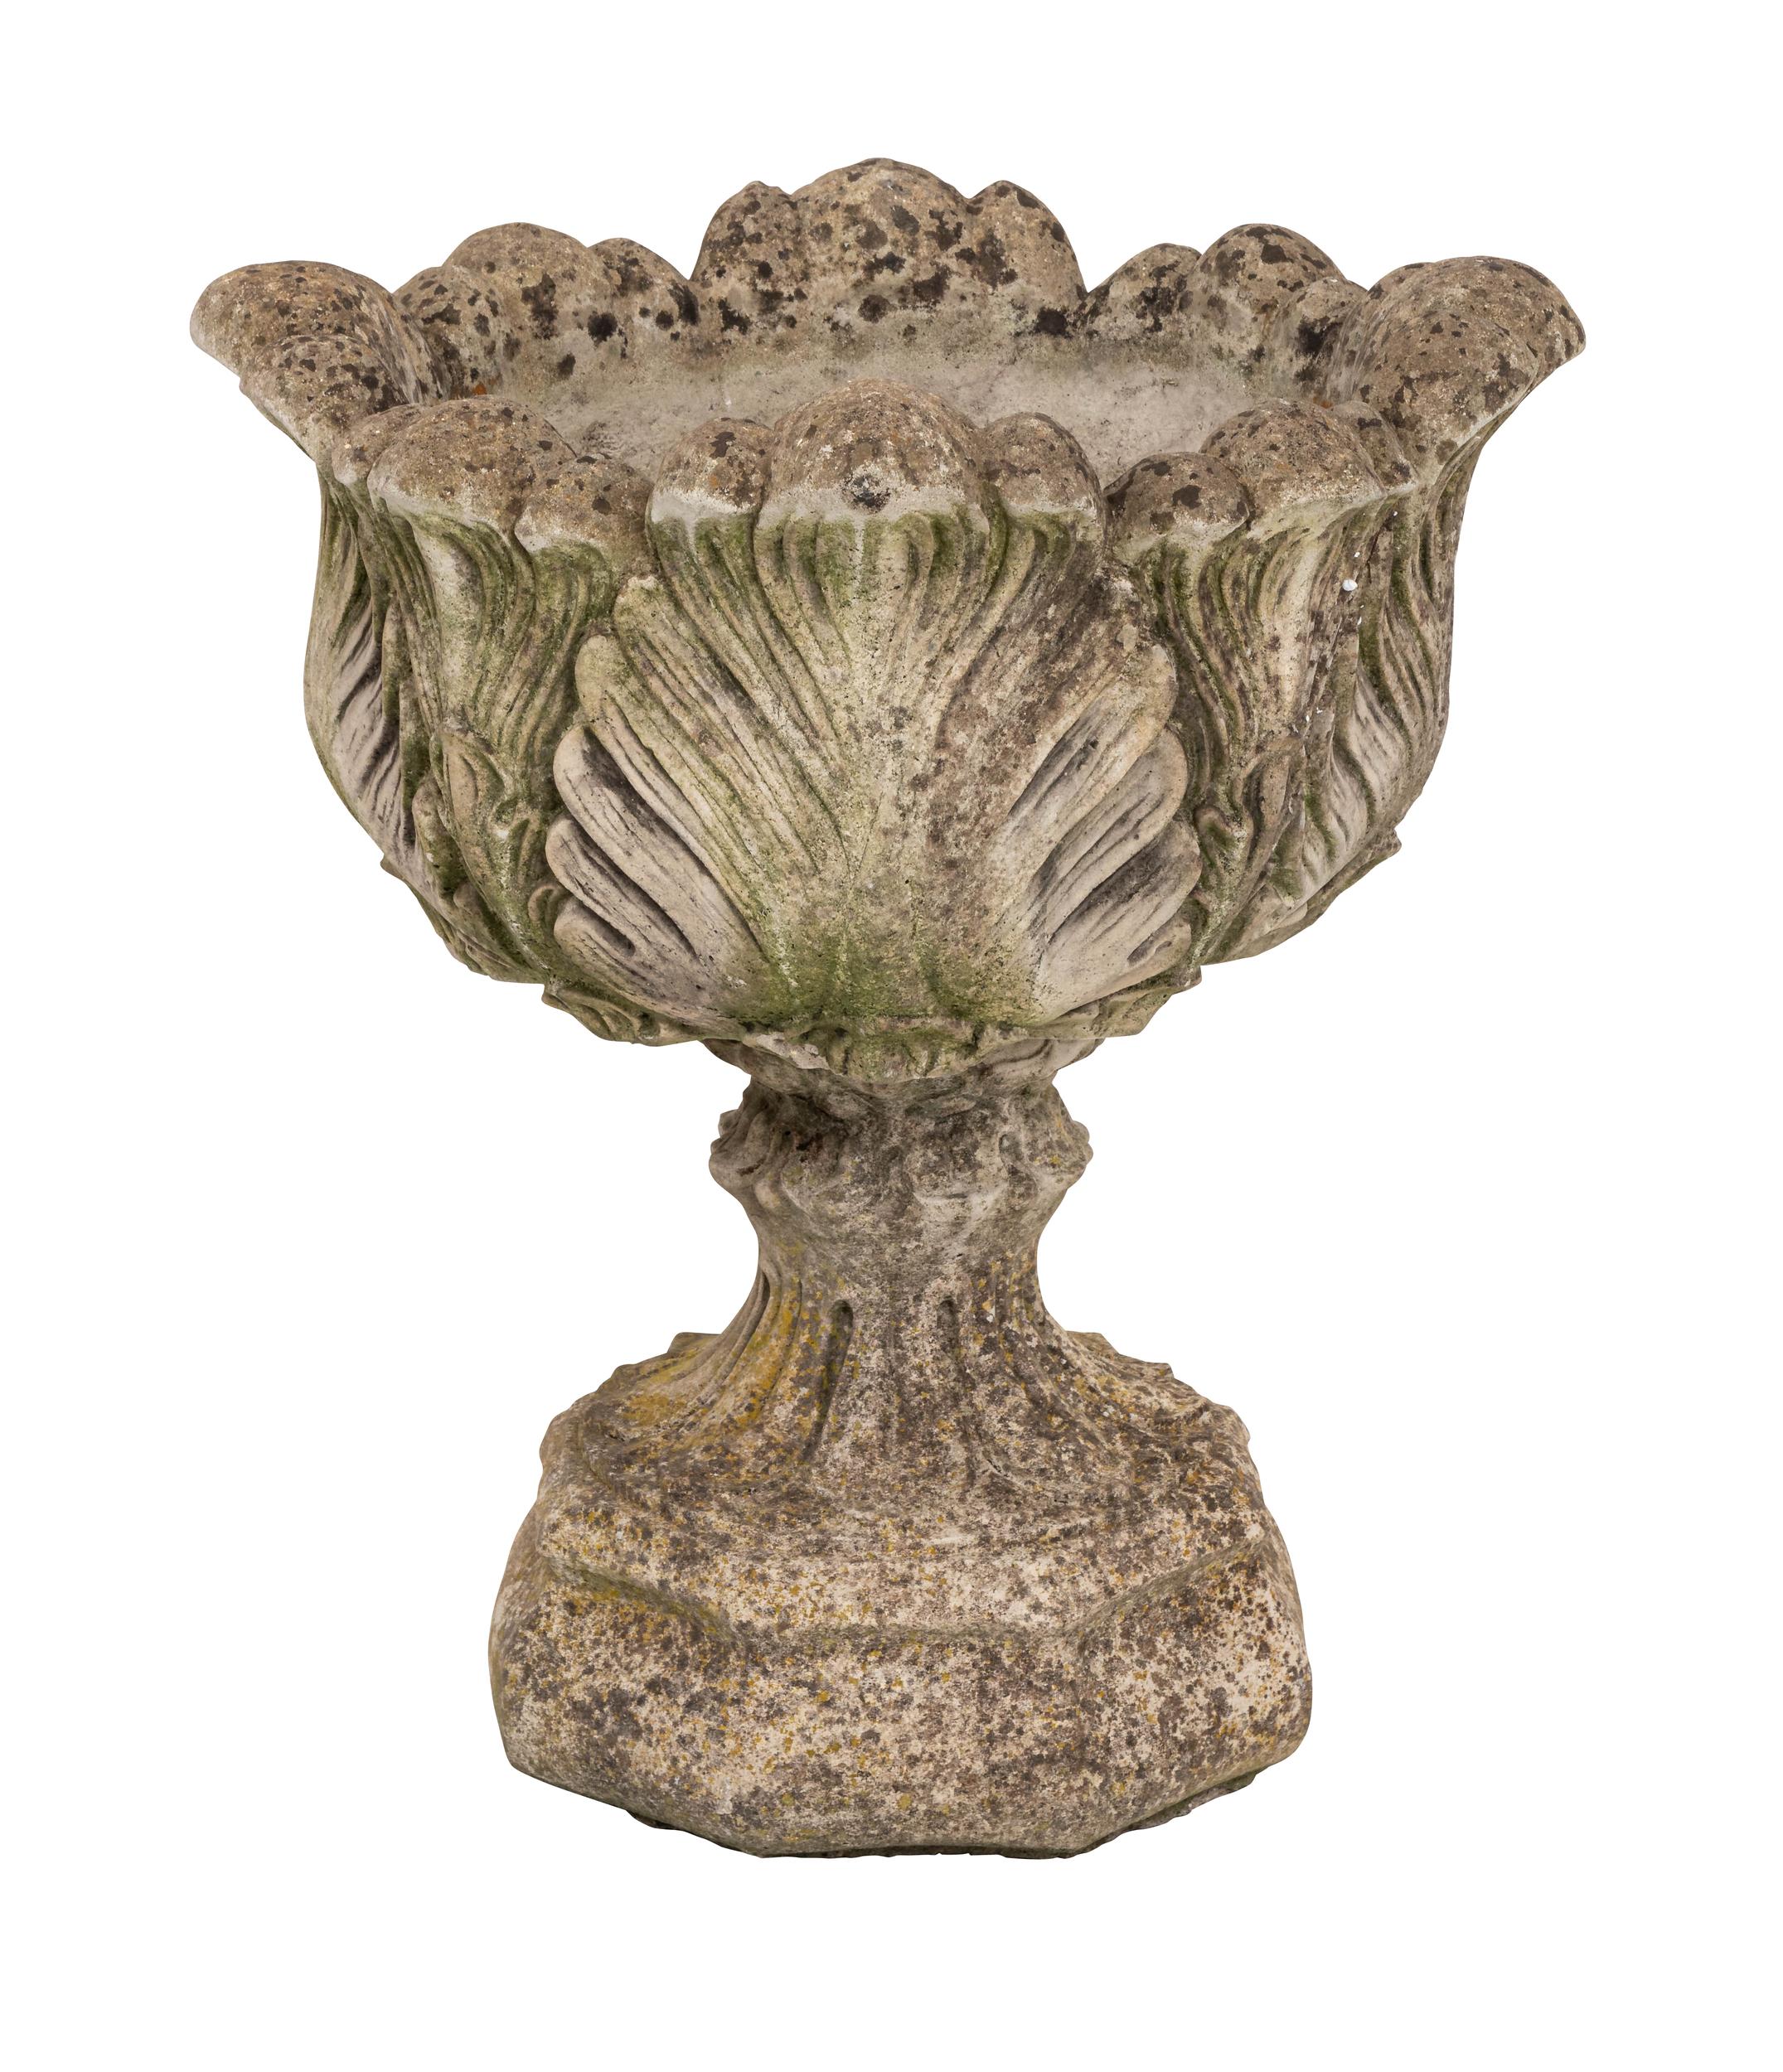 Classic pair of cast stone acanthus leaf planters on stands from France made in the 20th century. Intricate foliage makes up the beautiful design. This sturdy architectural pot is ideal for elevating greenery for a striking landscape. Beautifully